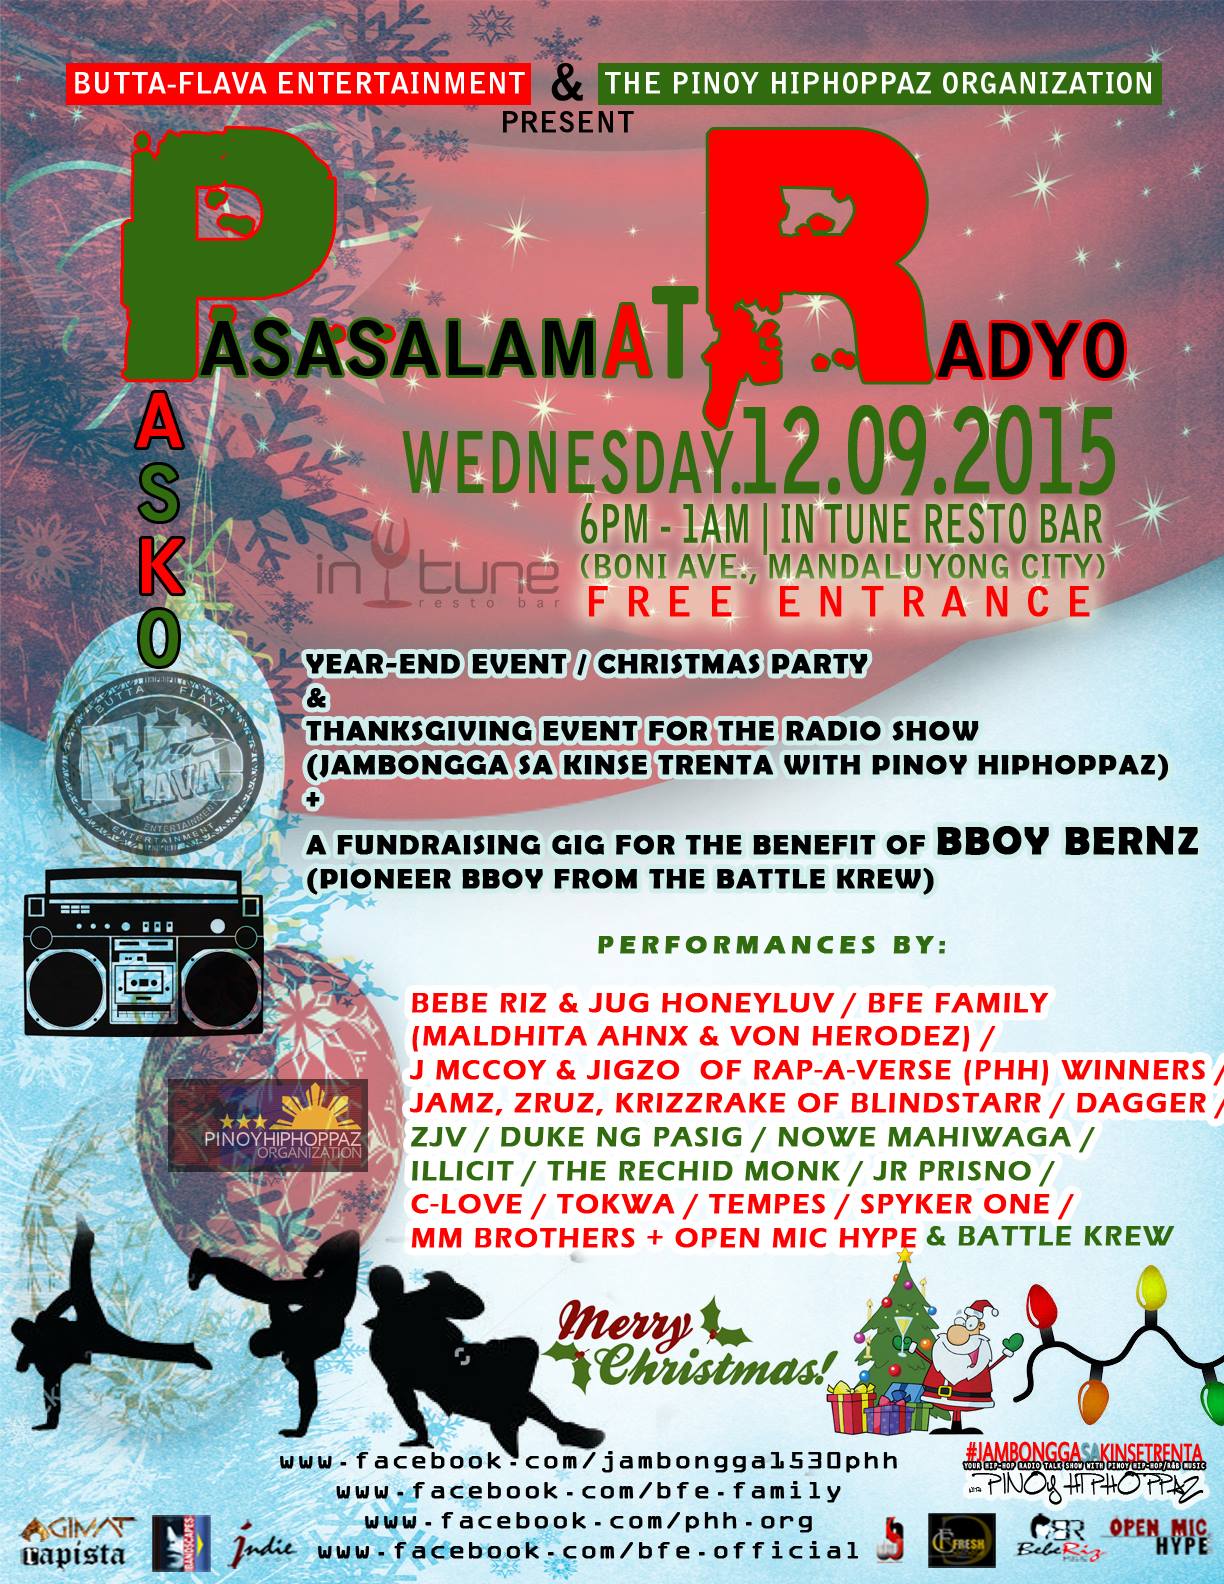 Jug Honeyluv BFe Wbh The FINAL poster courtesy of Fresh Concepts Creative Solutions. "PASKO, PASASALAMAT, AT RADYO" The BFe & PHH Year-End Event / Christmas Party & Thanksgiving Event for the Radio Show (Jambongga Sa Kinse Trenta with Pinoy Hiphoppaz) + A Fundraising gig for the benefit of Bboy Bernz (Pioneer Bboy from the legendary, Battle Krew) Wednesday, Dec. 9, 2015 6pm to 1am In Tune Resto Bar (Boni Ave., Mandaluyong City) FREE ENTRANCE (No Door Charge) RSVP: https://www.facebook.com/events/1735007006729704/ #Christmas #Party #Holiday #YearEnd #Radio #Thanksgiving #Benefit #Fundraiser #Charity #BboyBernz #BattleKrew #OpenMicHype #Share